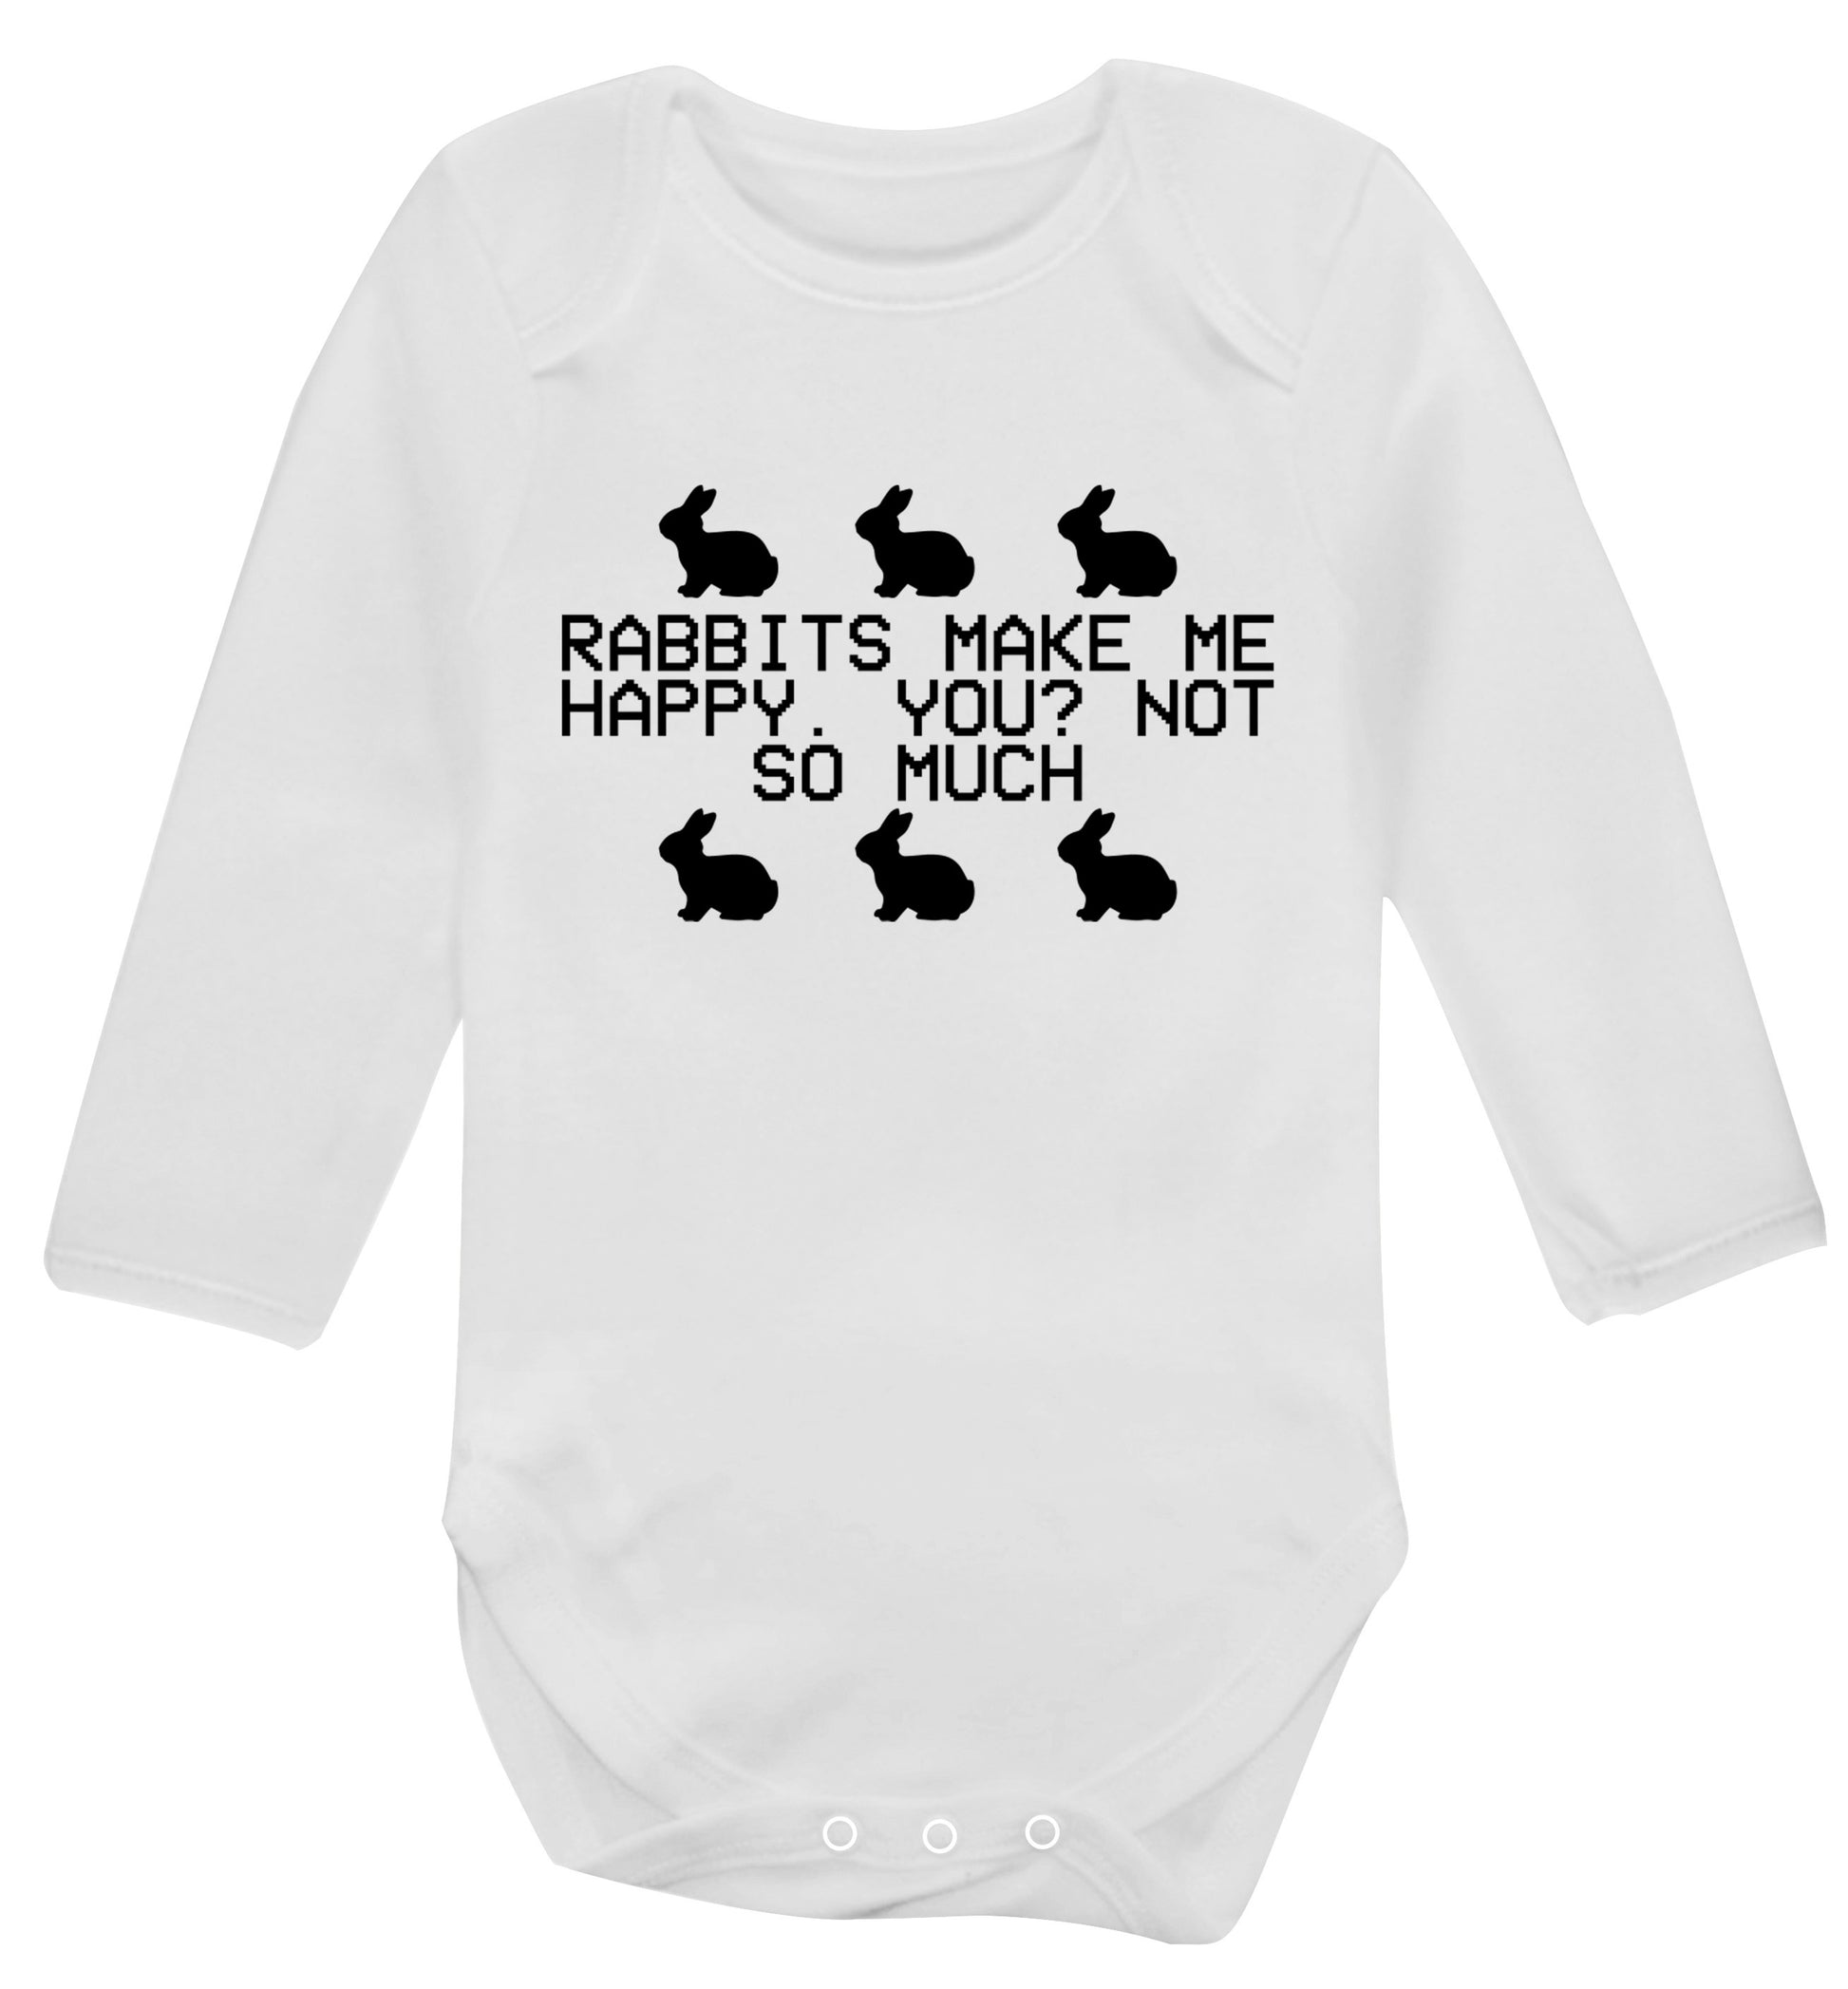 Rabbits make me happy, you not so much Baby Vest long sleeved white 6-12 months